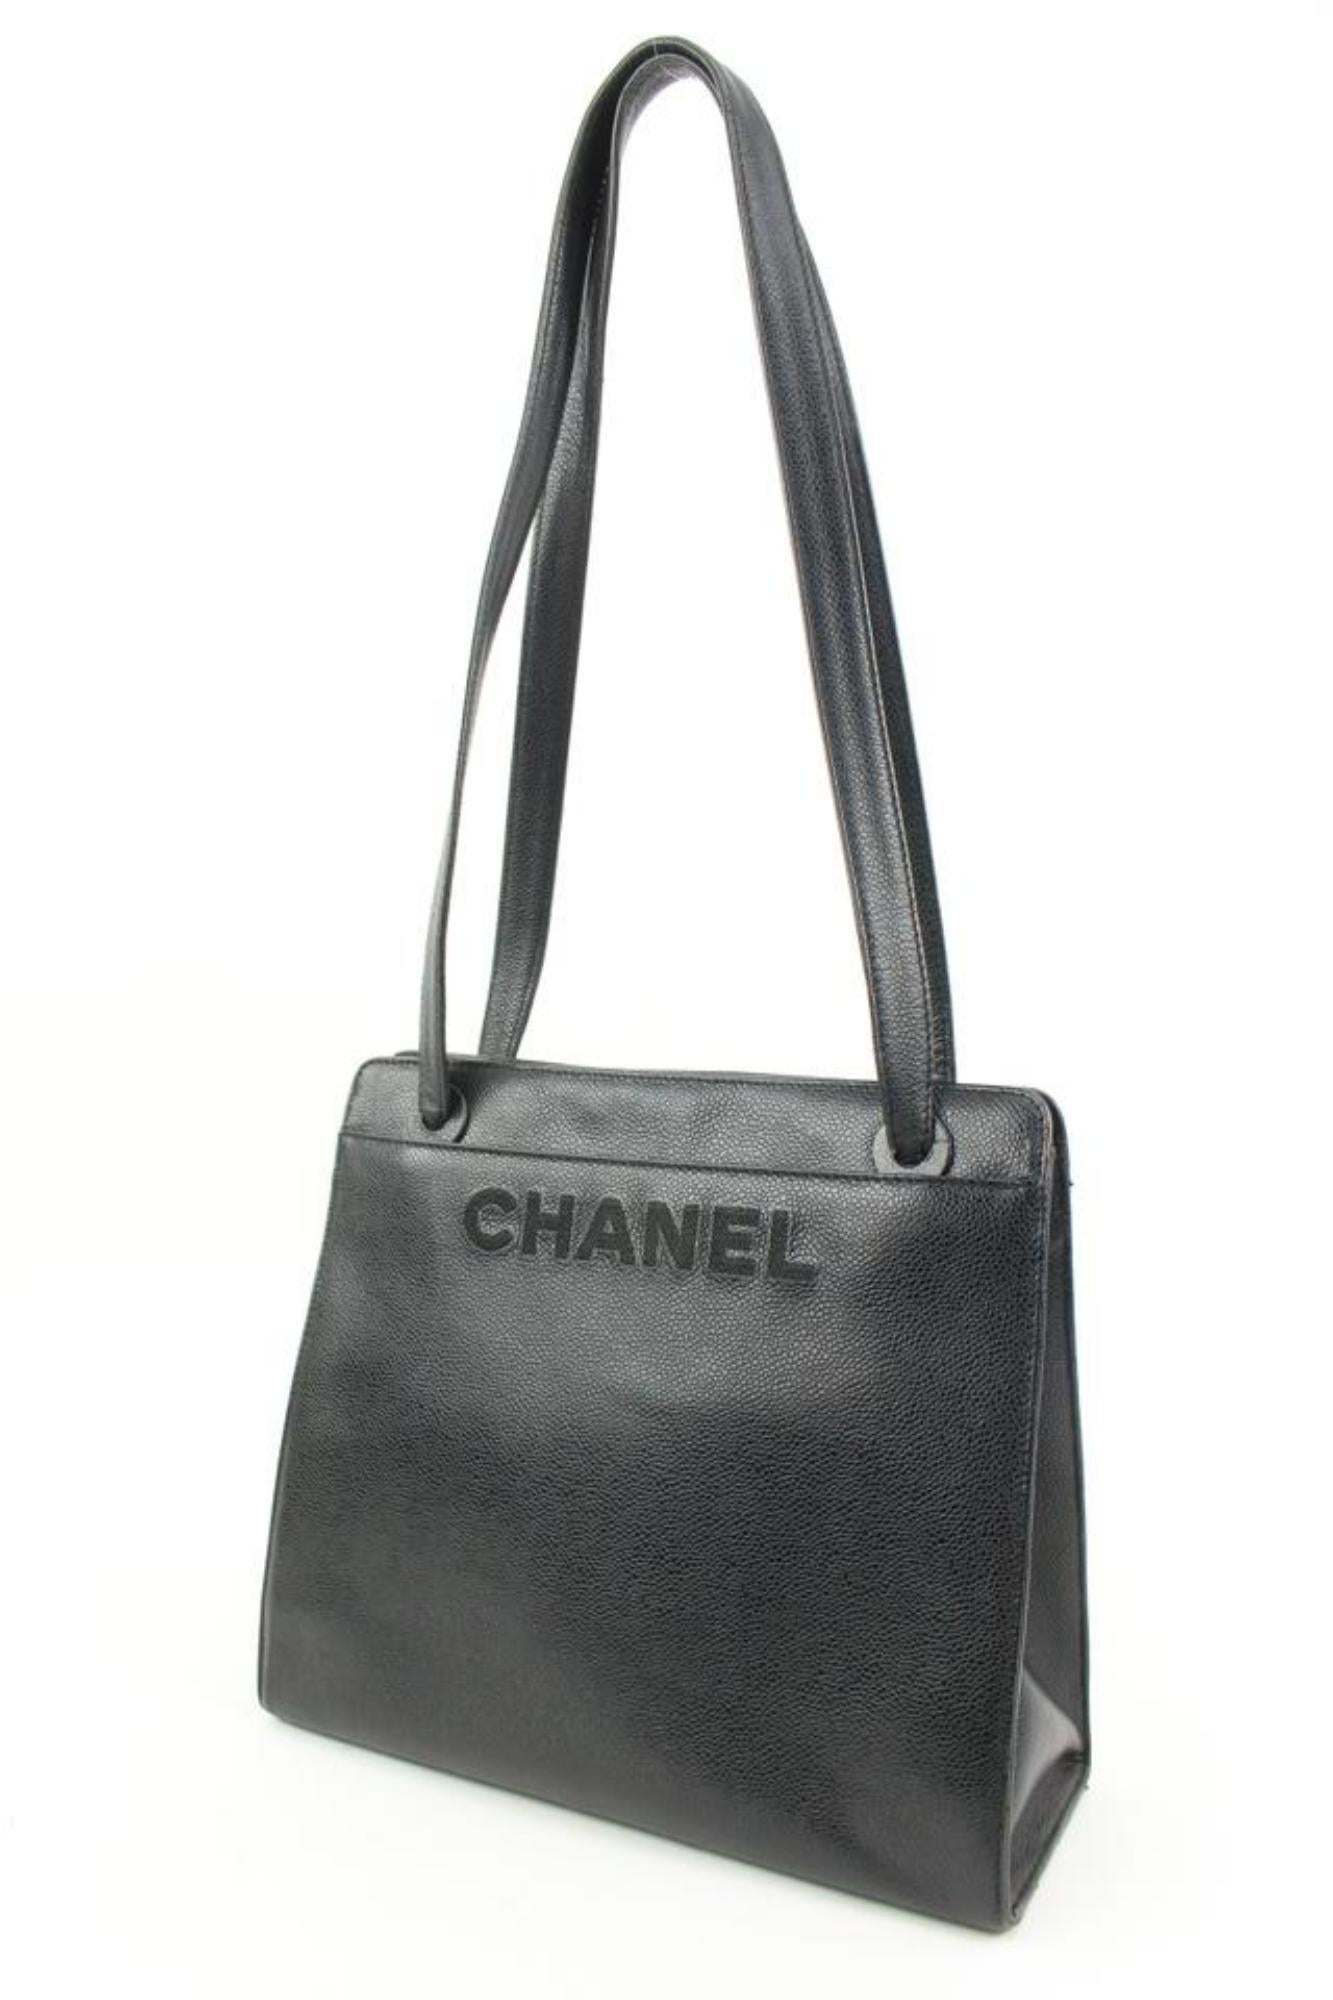 Chanel Black Caviar Logo Shopper Tote Bag 10c131s
Date Code/Serial Number: 6182151
Made In: Italy
Measurements: Length:  11.5